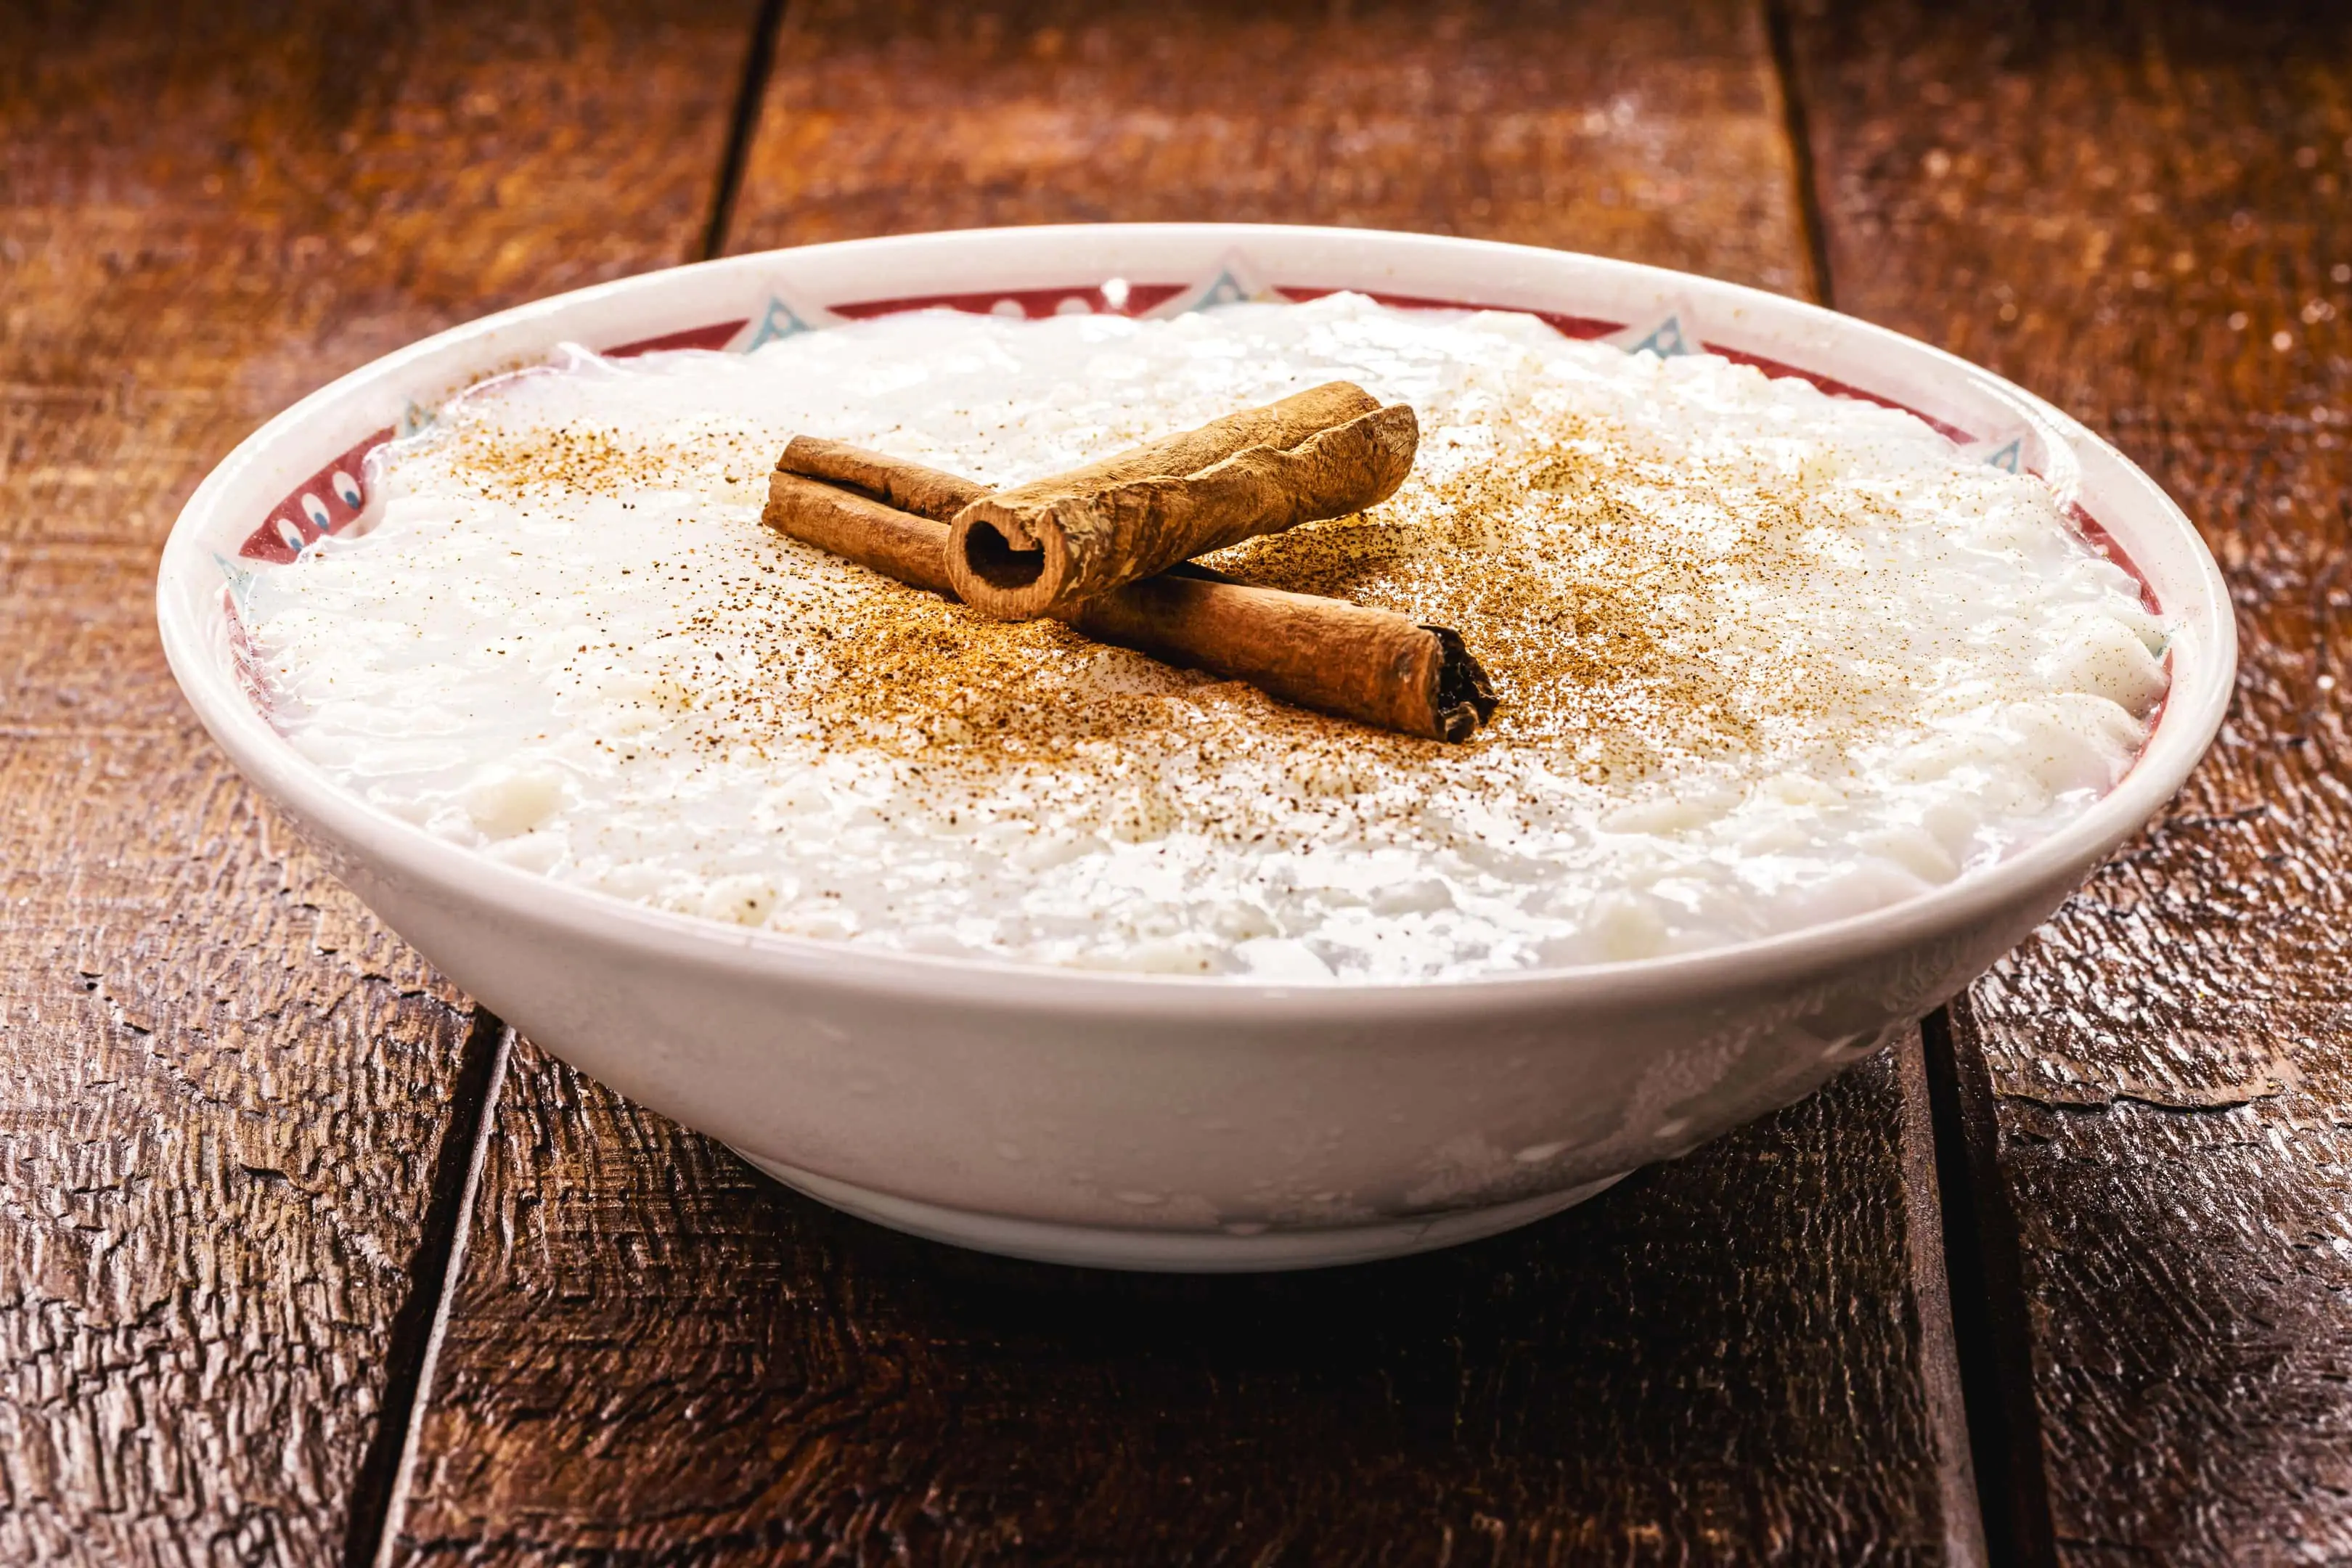 Sweet rice pudding recipe with cooked rice and cinnamon stick